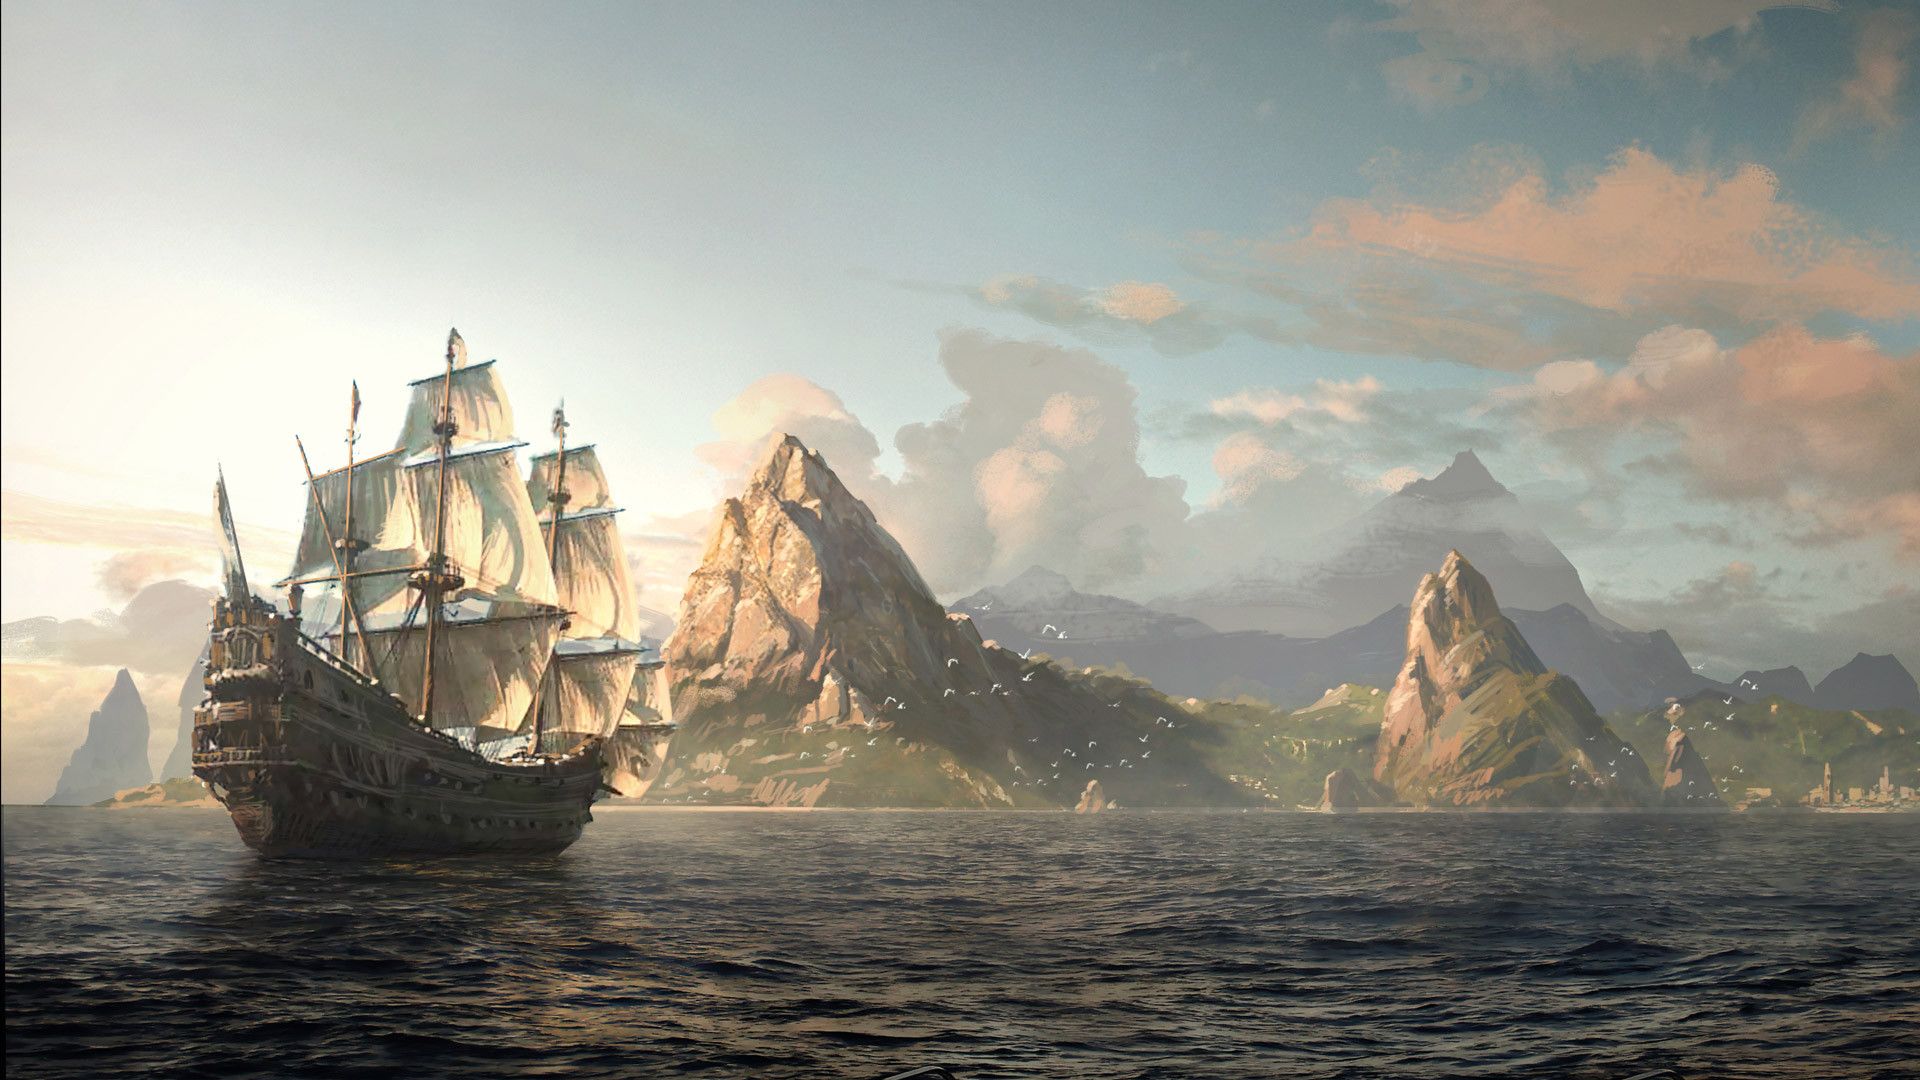 Beautiful concept art for upcoming Assassin's Creed game ...